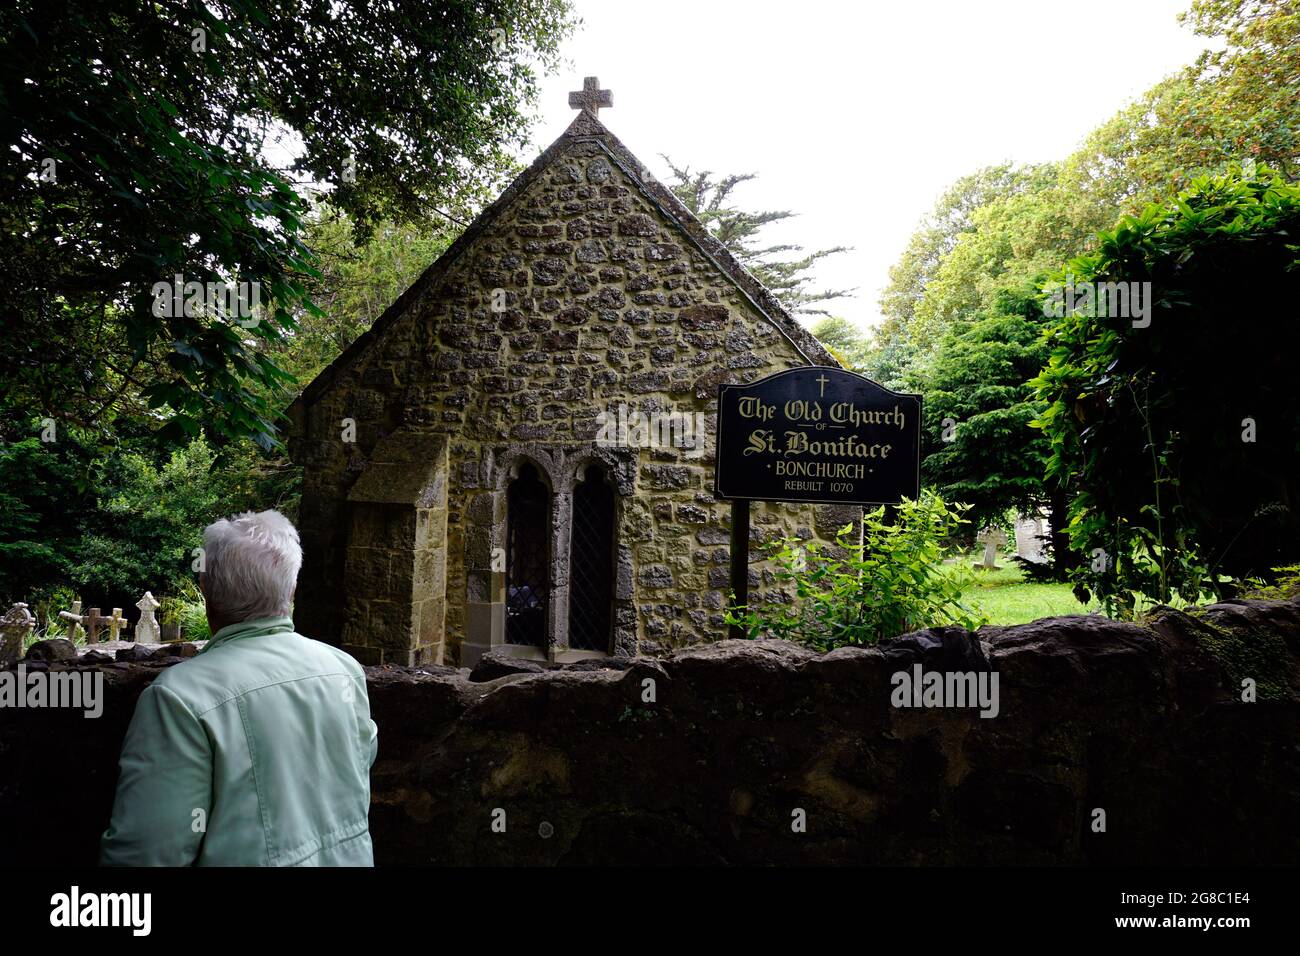 St Boniface old church rebuilt in 1070 stands alone in woodland at Bonchurch on the Isle of Wight. Stock Photo